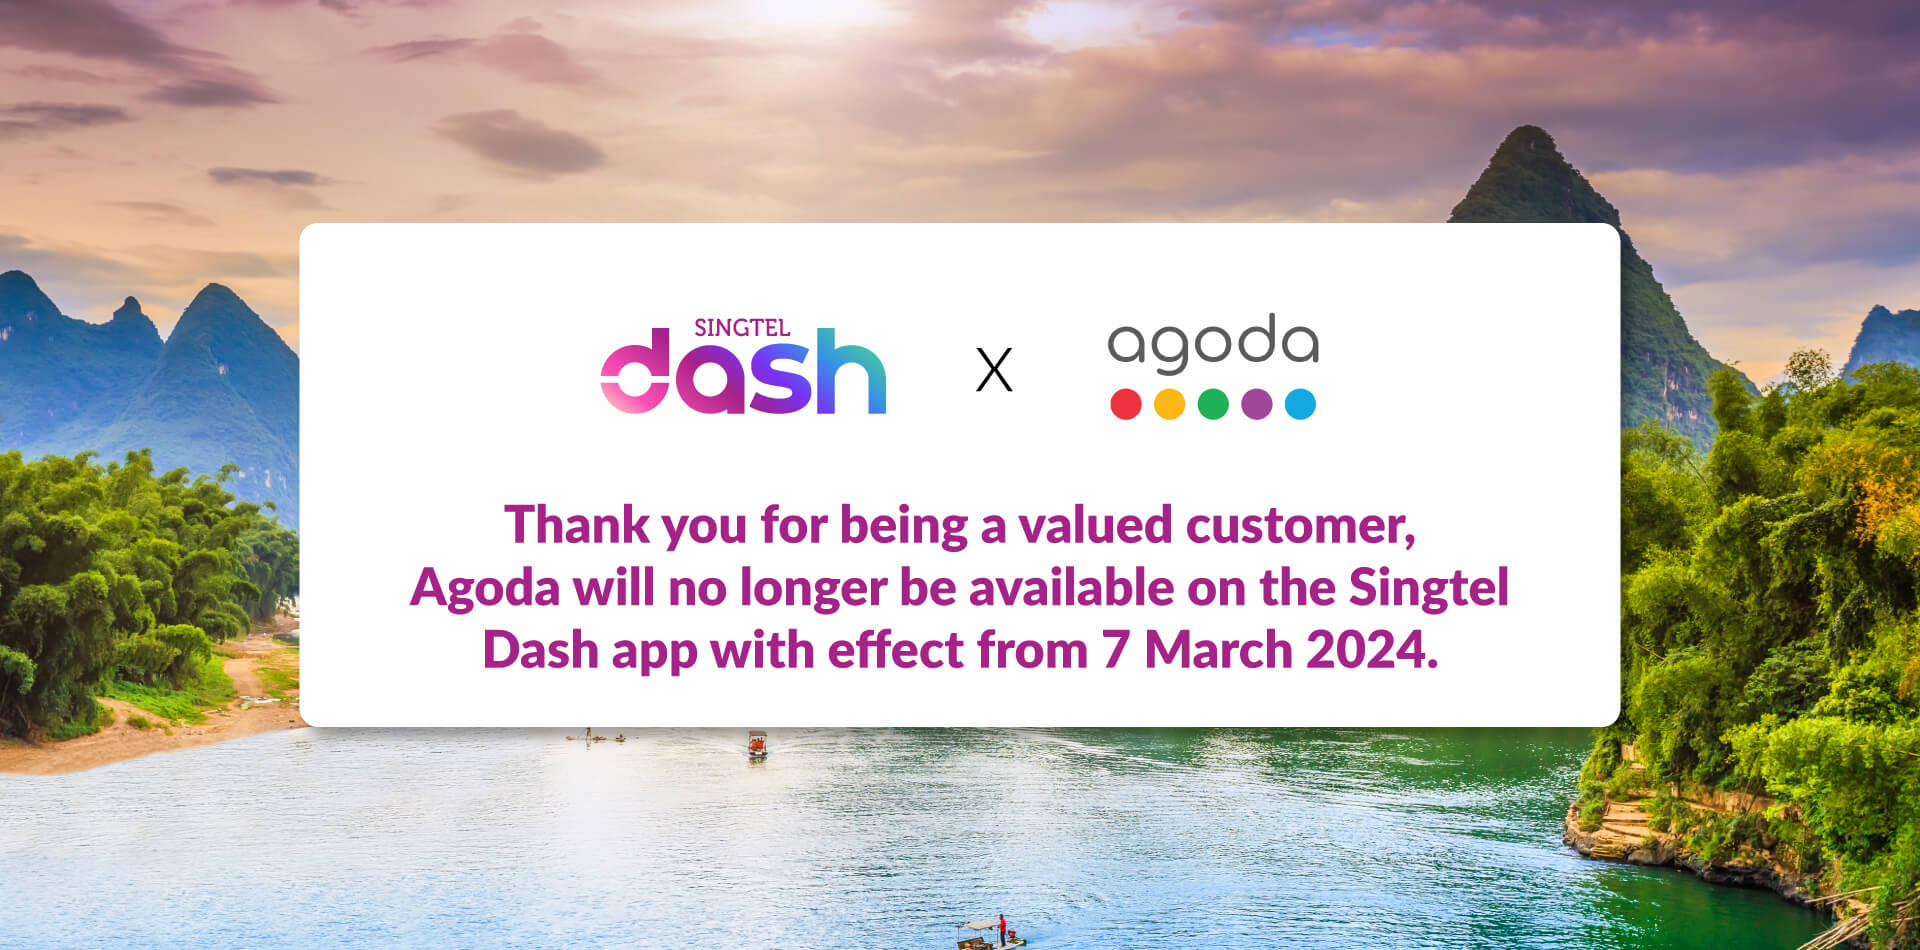 Singtel Dash is ending it service with agoda on 7 march 2024